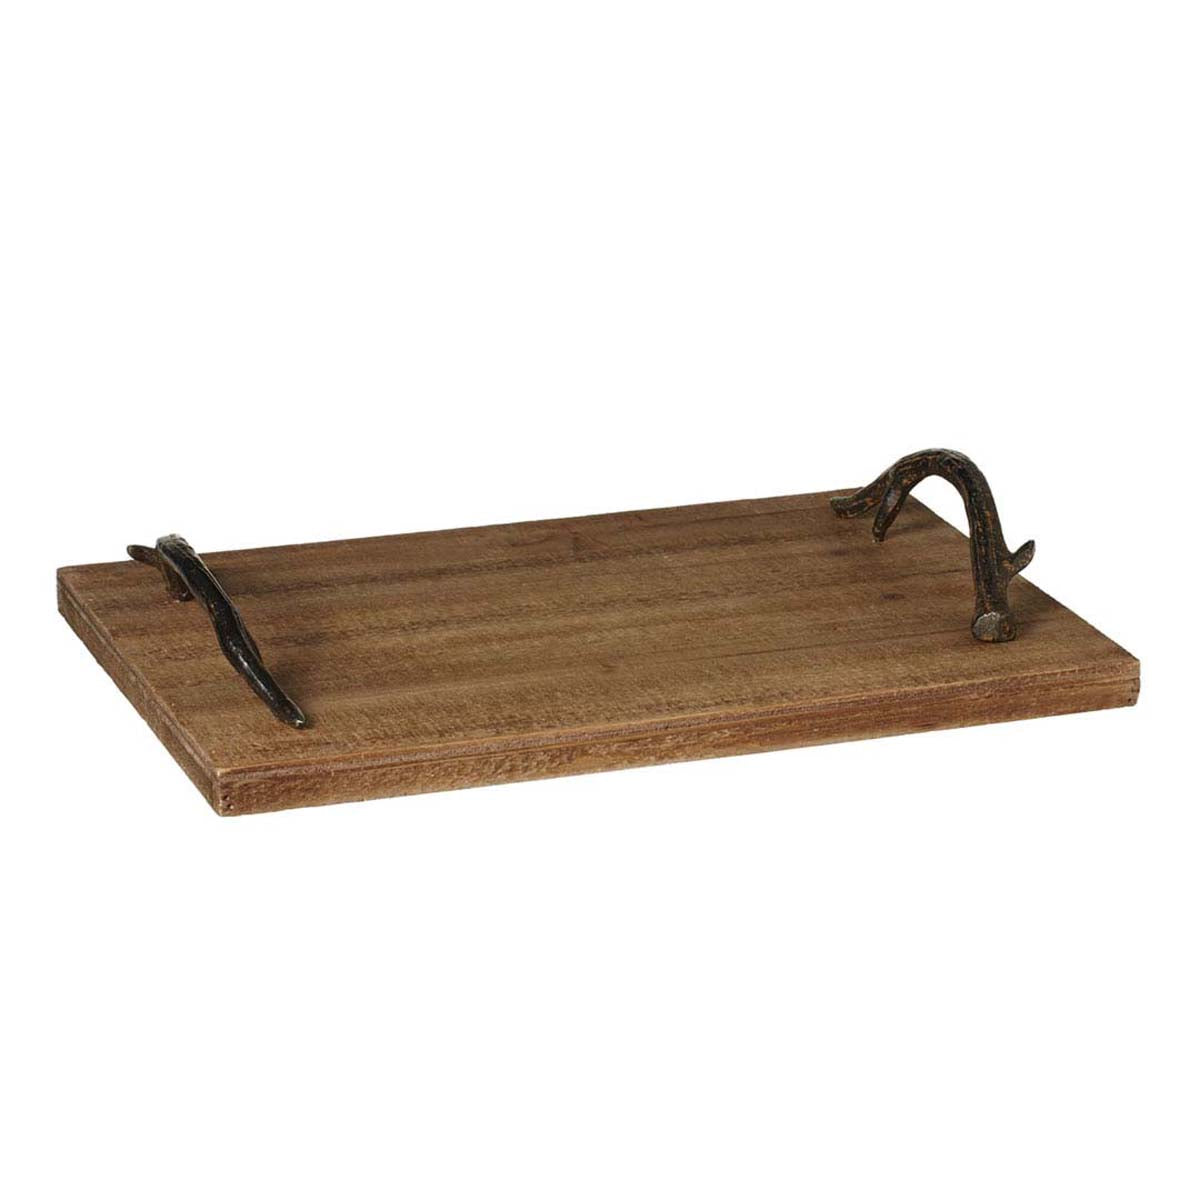 Decorative Tray with Antler Handles